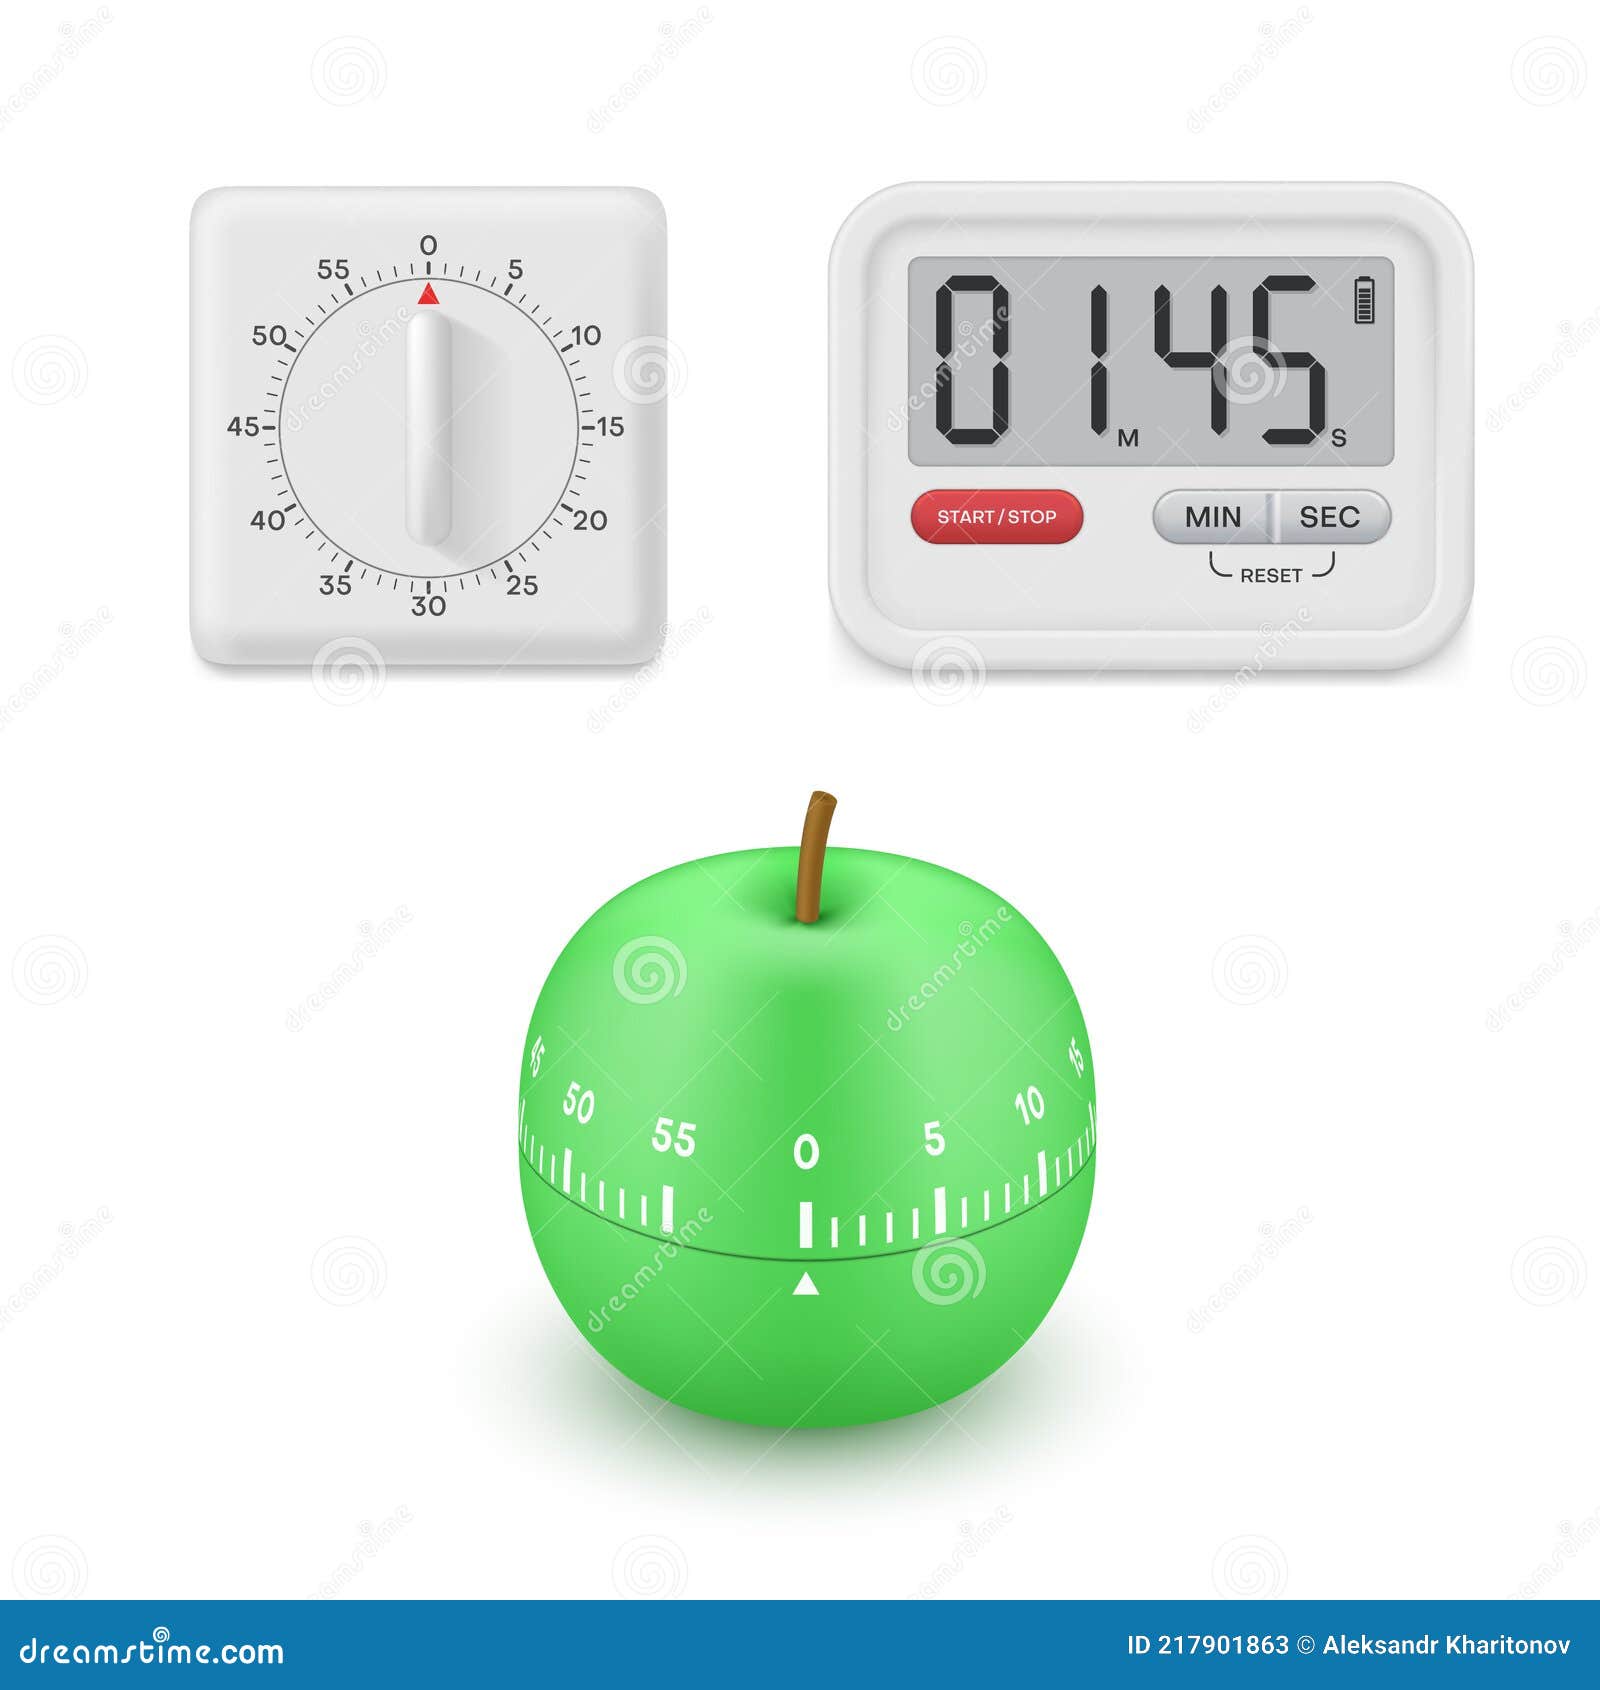 https://thumbs.dreamstime.com/z/collection-different-realistic-kitchen-timer-vector-illustration-set-analog-digital-mechanical-time-measurement-isolated-217901863.jpg